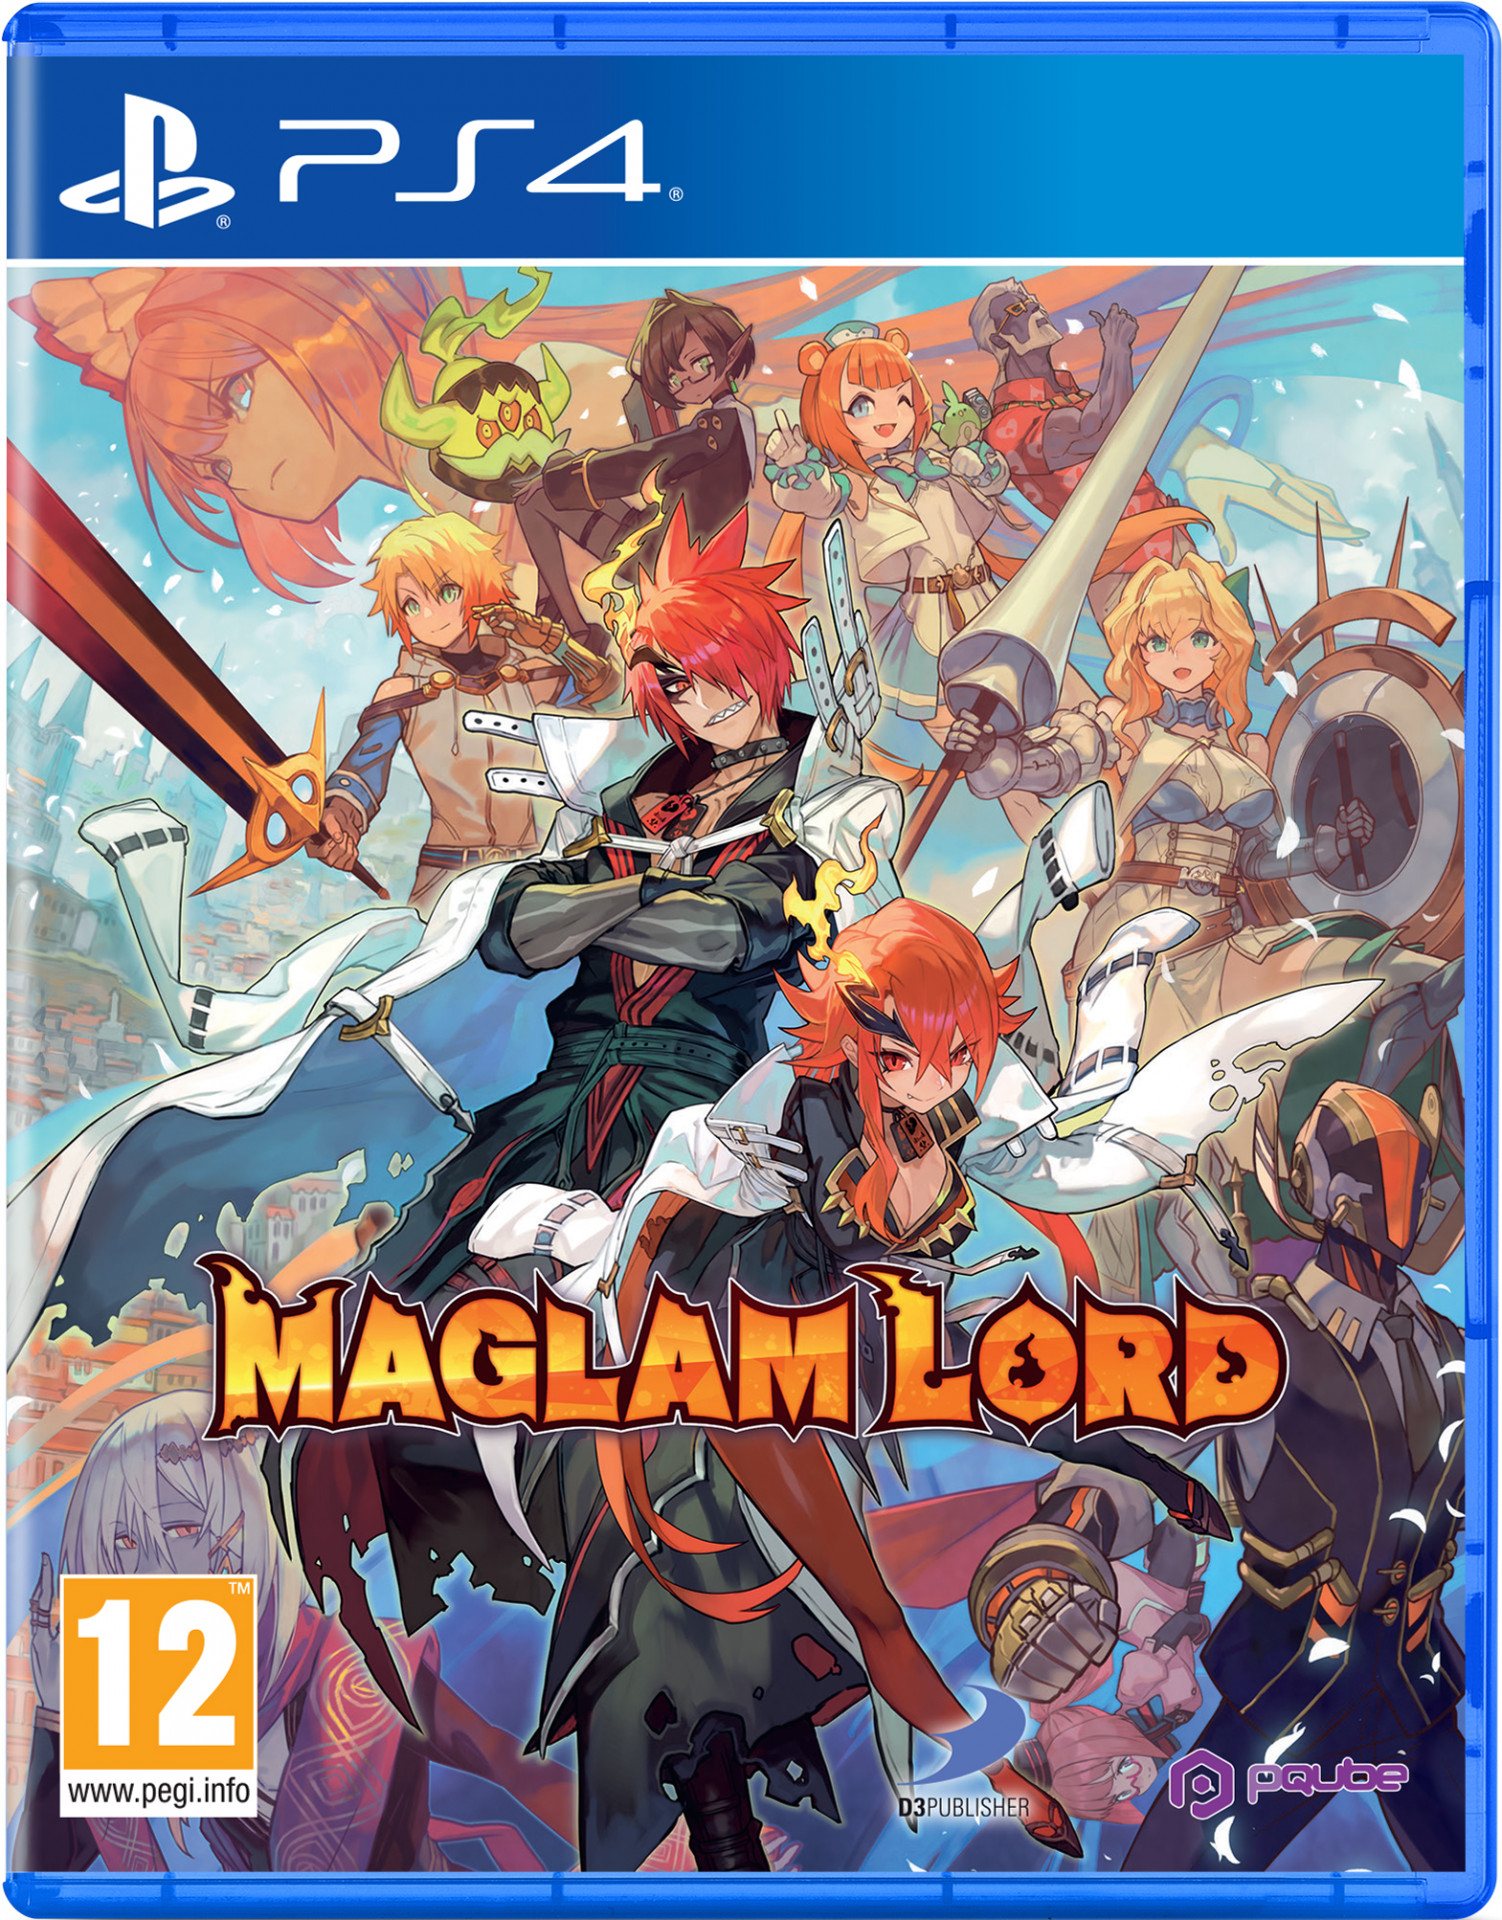 Maglam Lord (PS4), Pqube